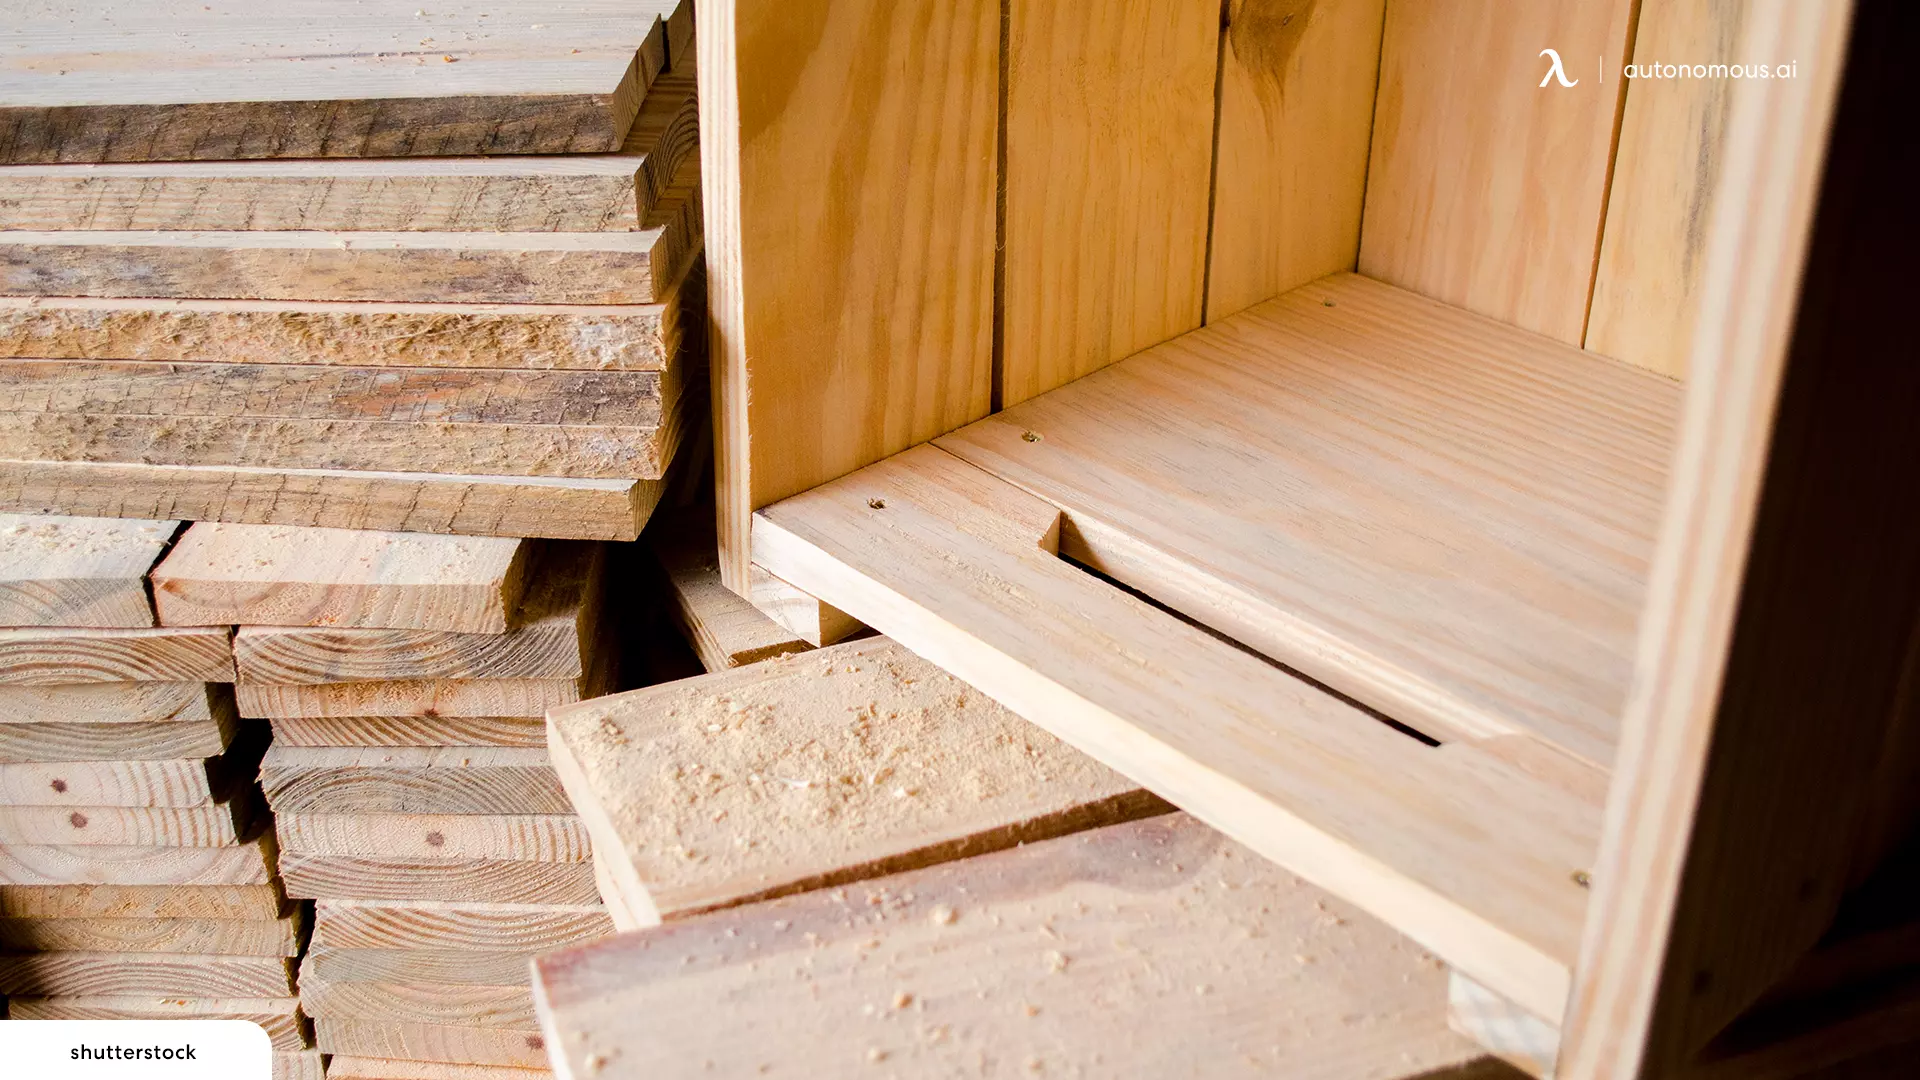 How Strong Is Oak Wood Furniture?